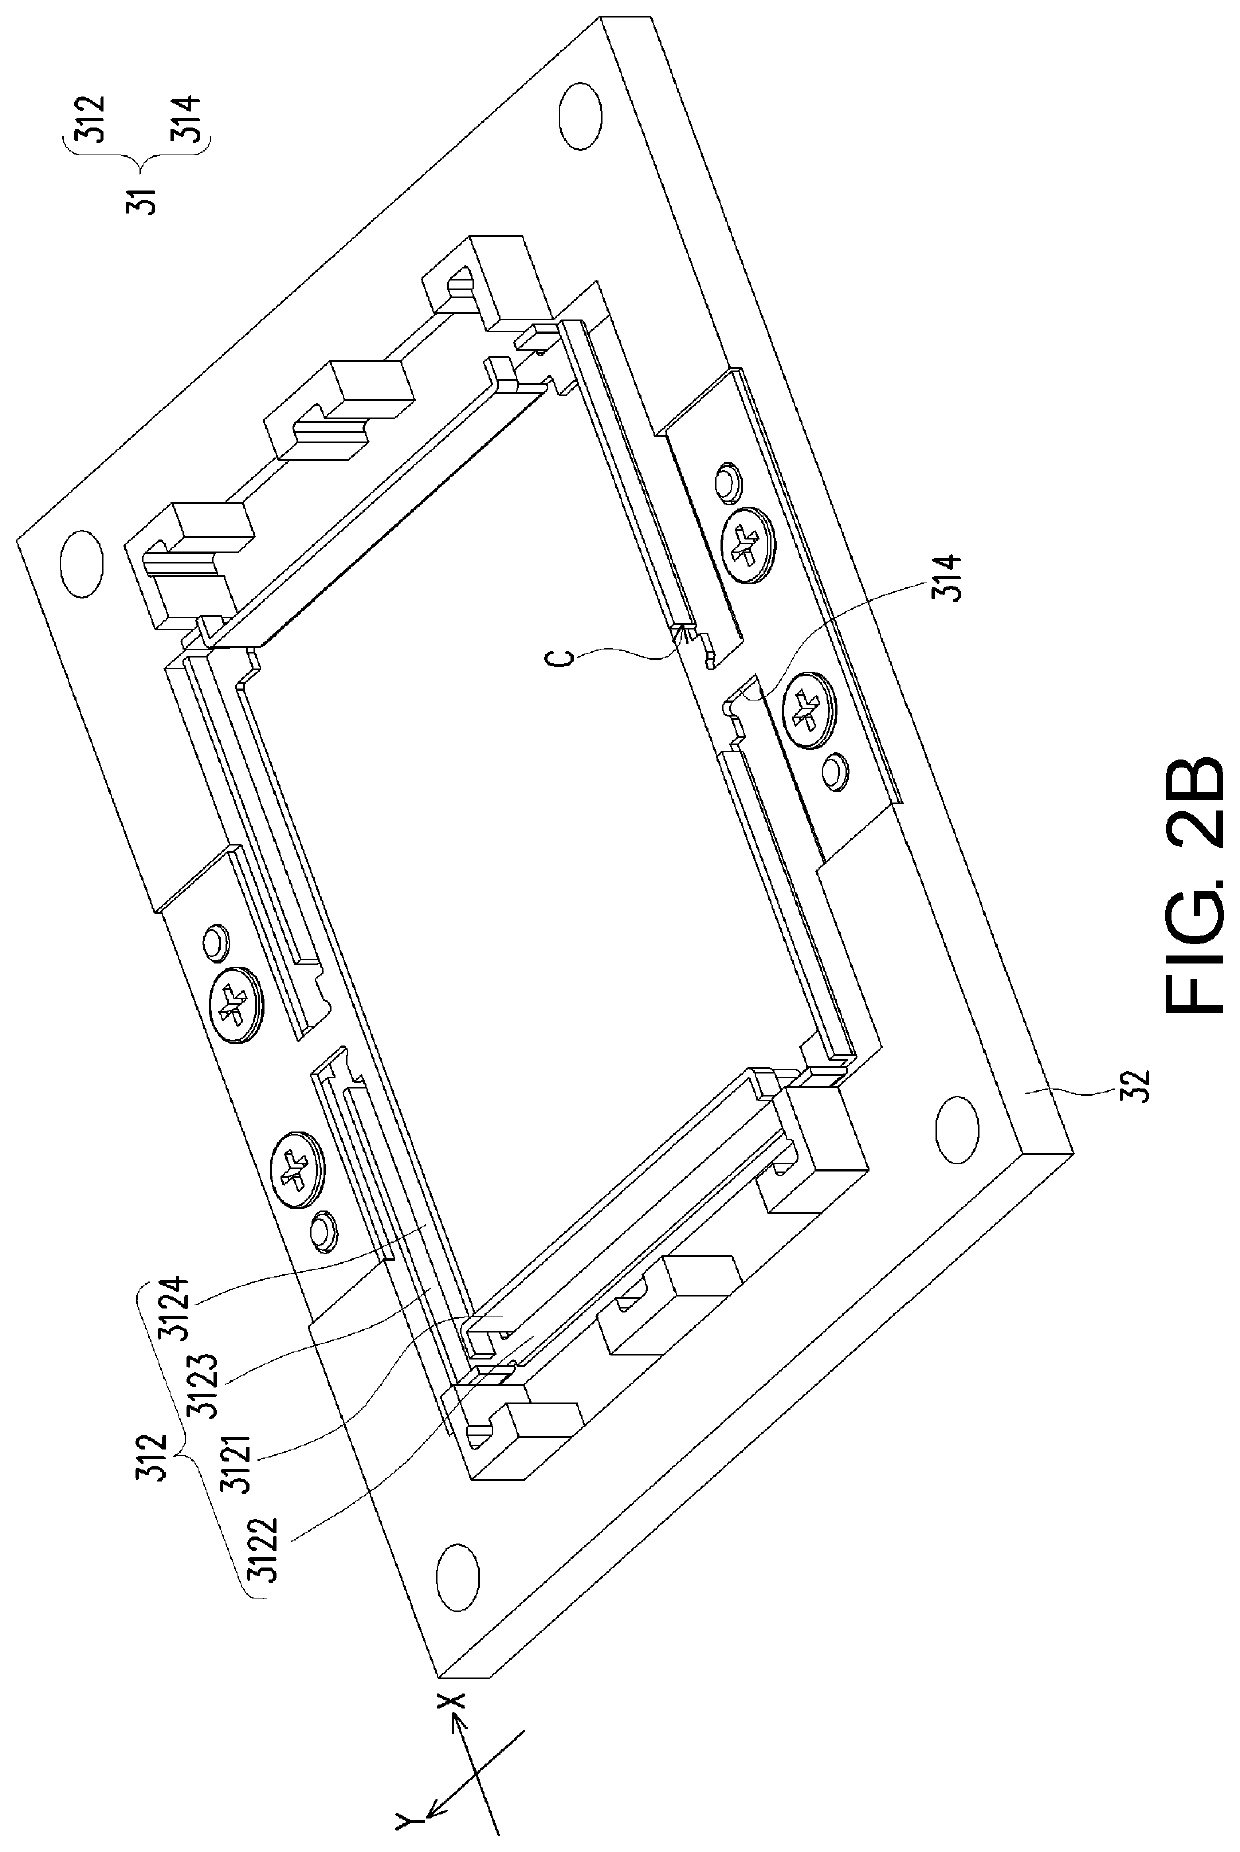 Optical module and projection apparatus